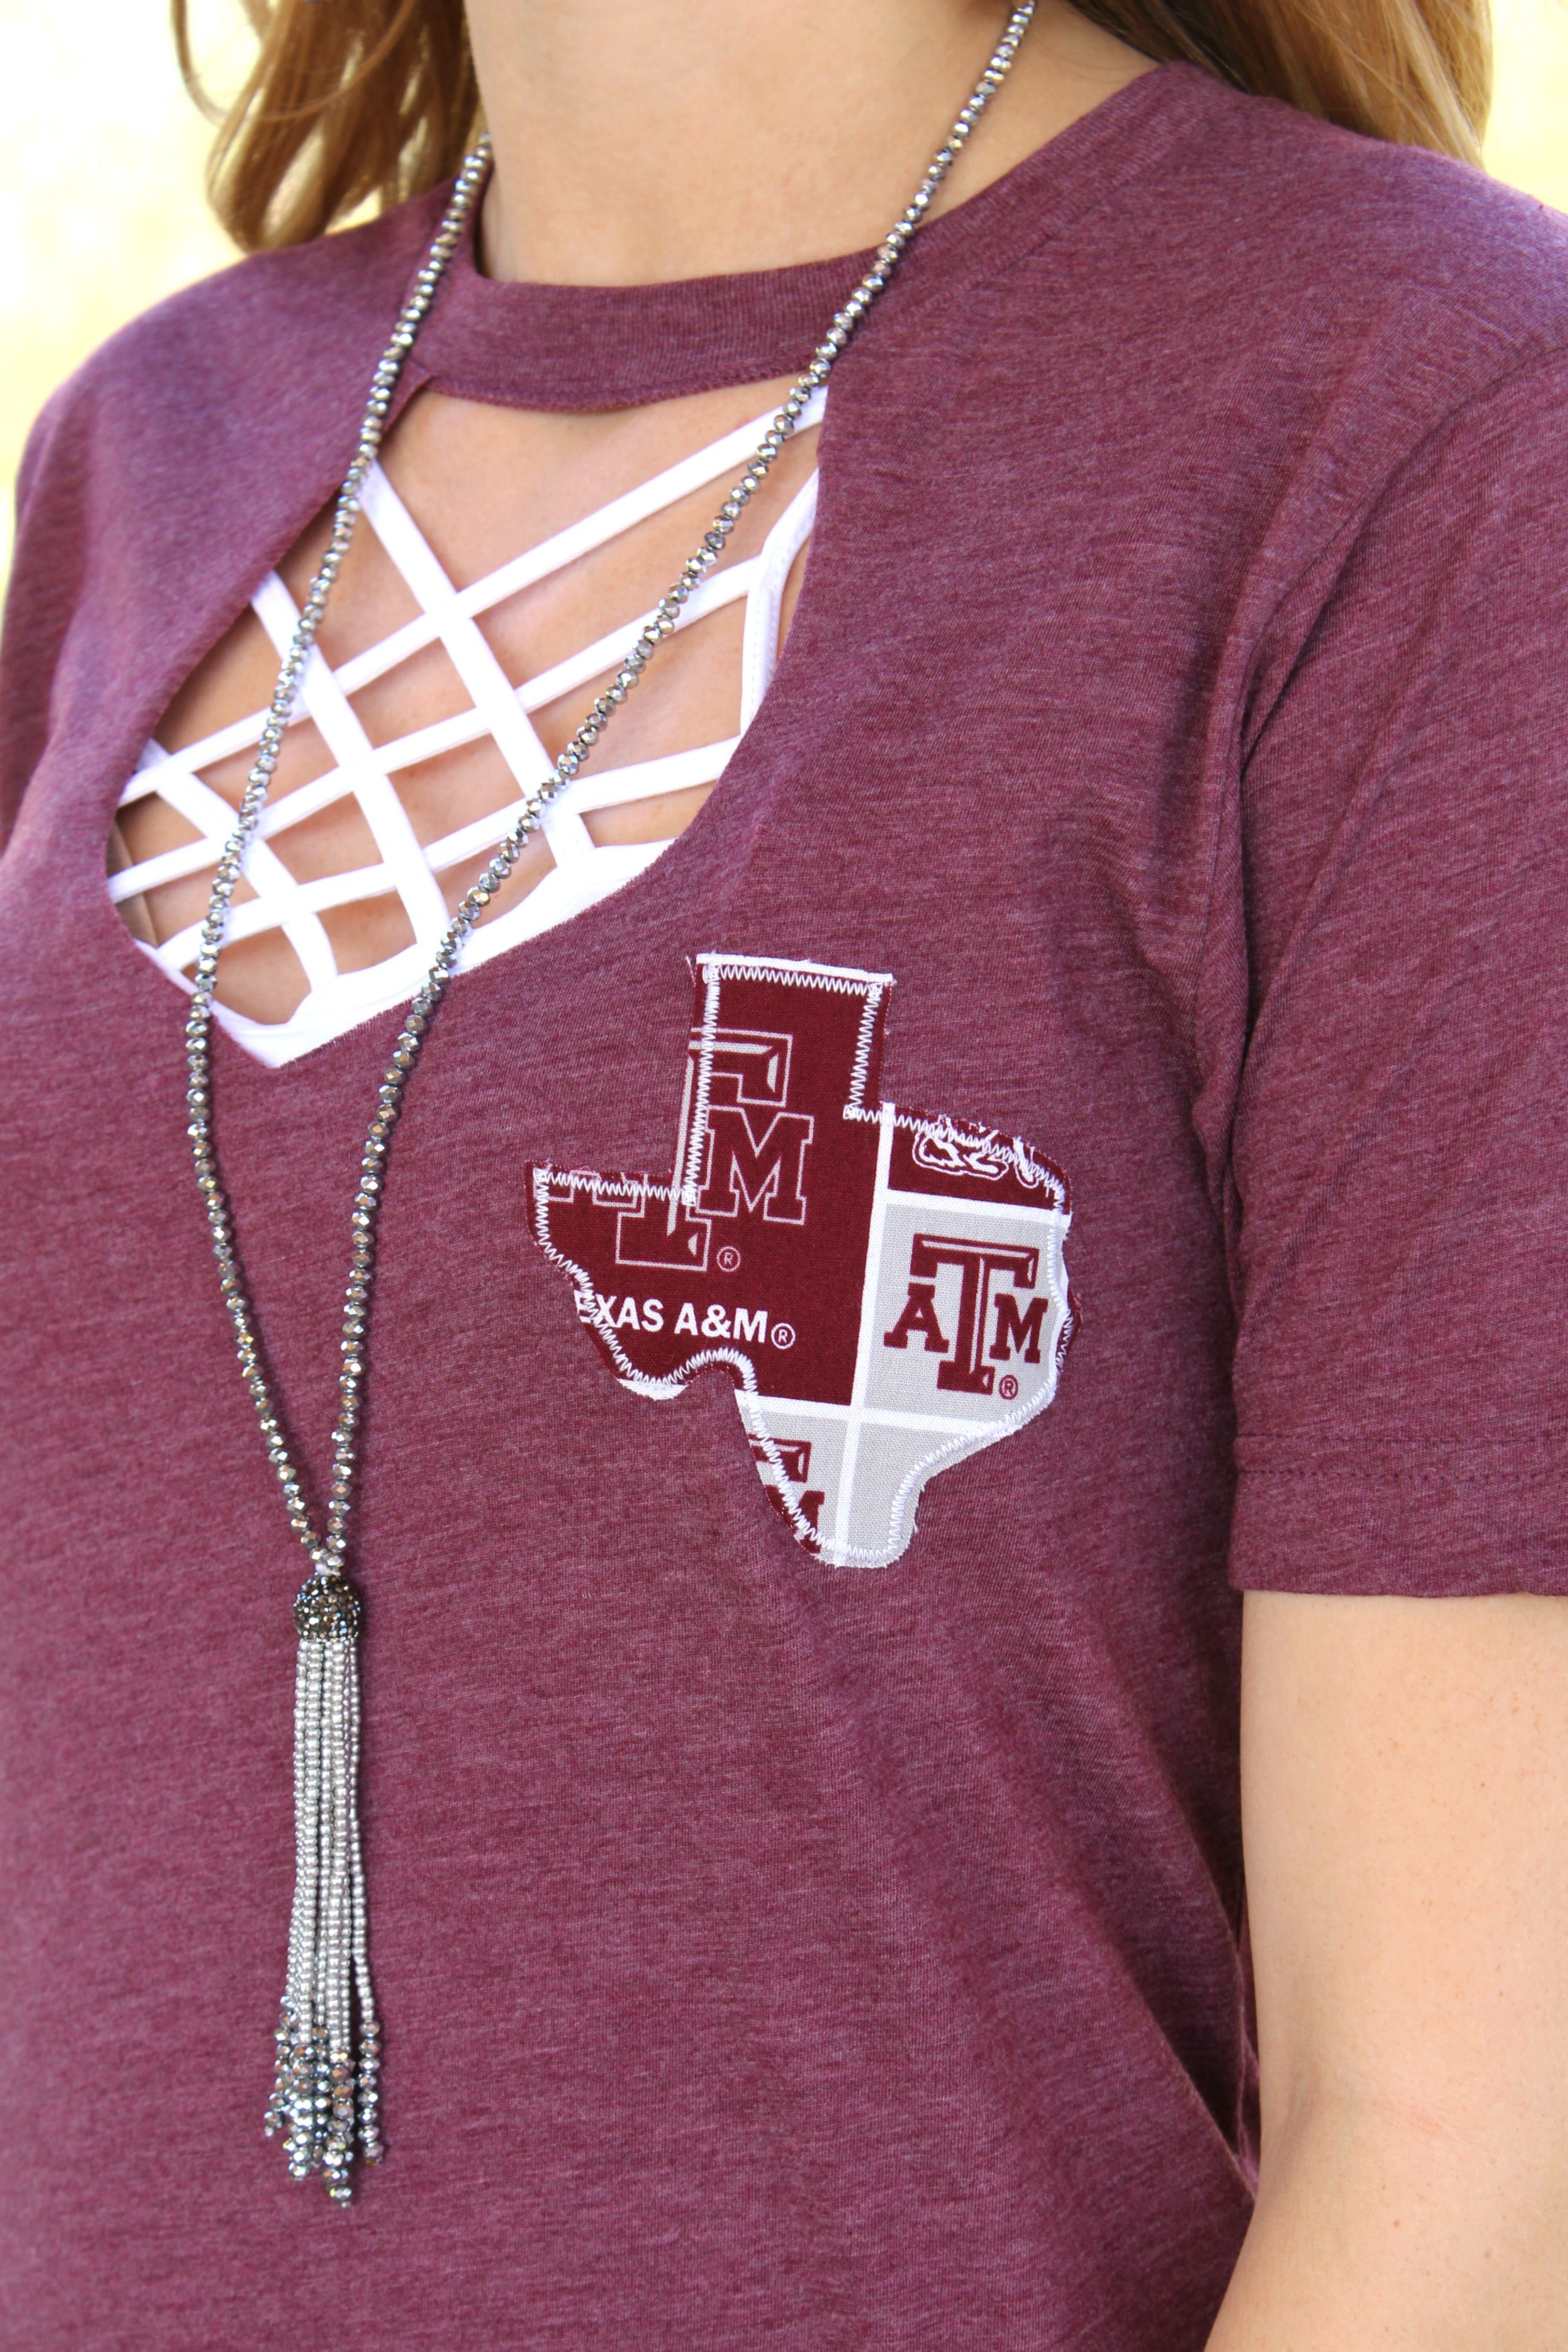 Gameday Couture Shirts | GameDay Aggie Tee Shirts | Game Day Couture Texas